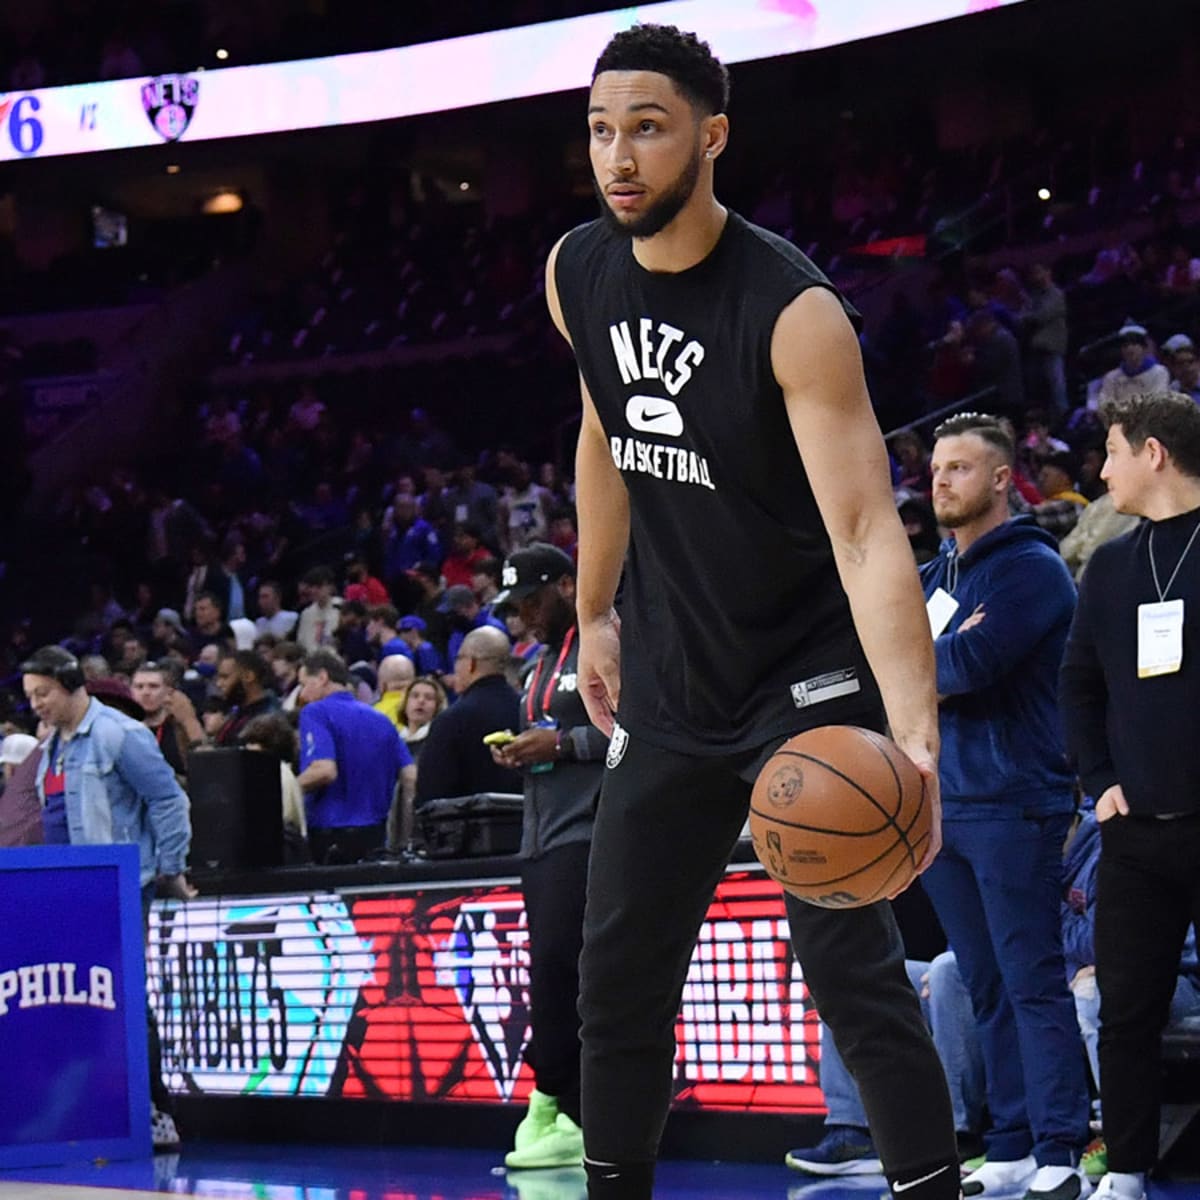 Ben Simmons Finally Plays, but the Nets Lose - The New York Times